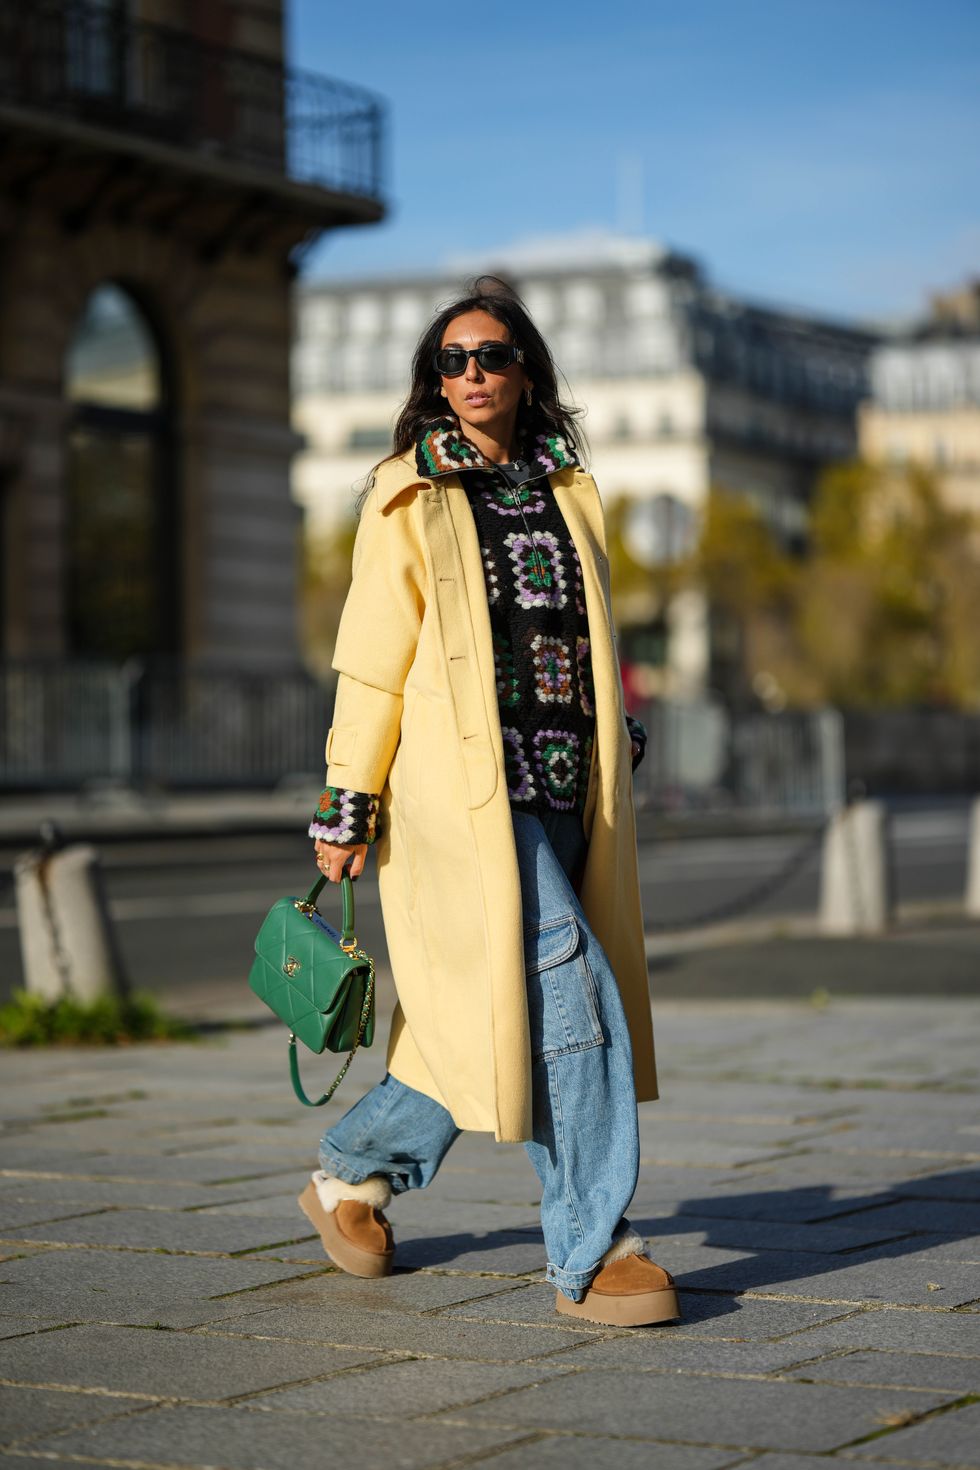 paris, france november 02 gabriella berdugo wears black sunglasses from versace, gold earrings, a black brown green purple white print pattern puffy wool zipper sweater from gestuz, a pale yellow long coat from american vintage, a green shiny leather coco handle handbag from chanel, silver rings, blue denim cargo large pants, camel suede with white sheep interior platform mules from uggs, during a street style fashion photo session, on november 02, 2022 in paris, france photo by edward berthelotgetty images